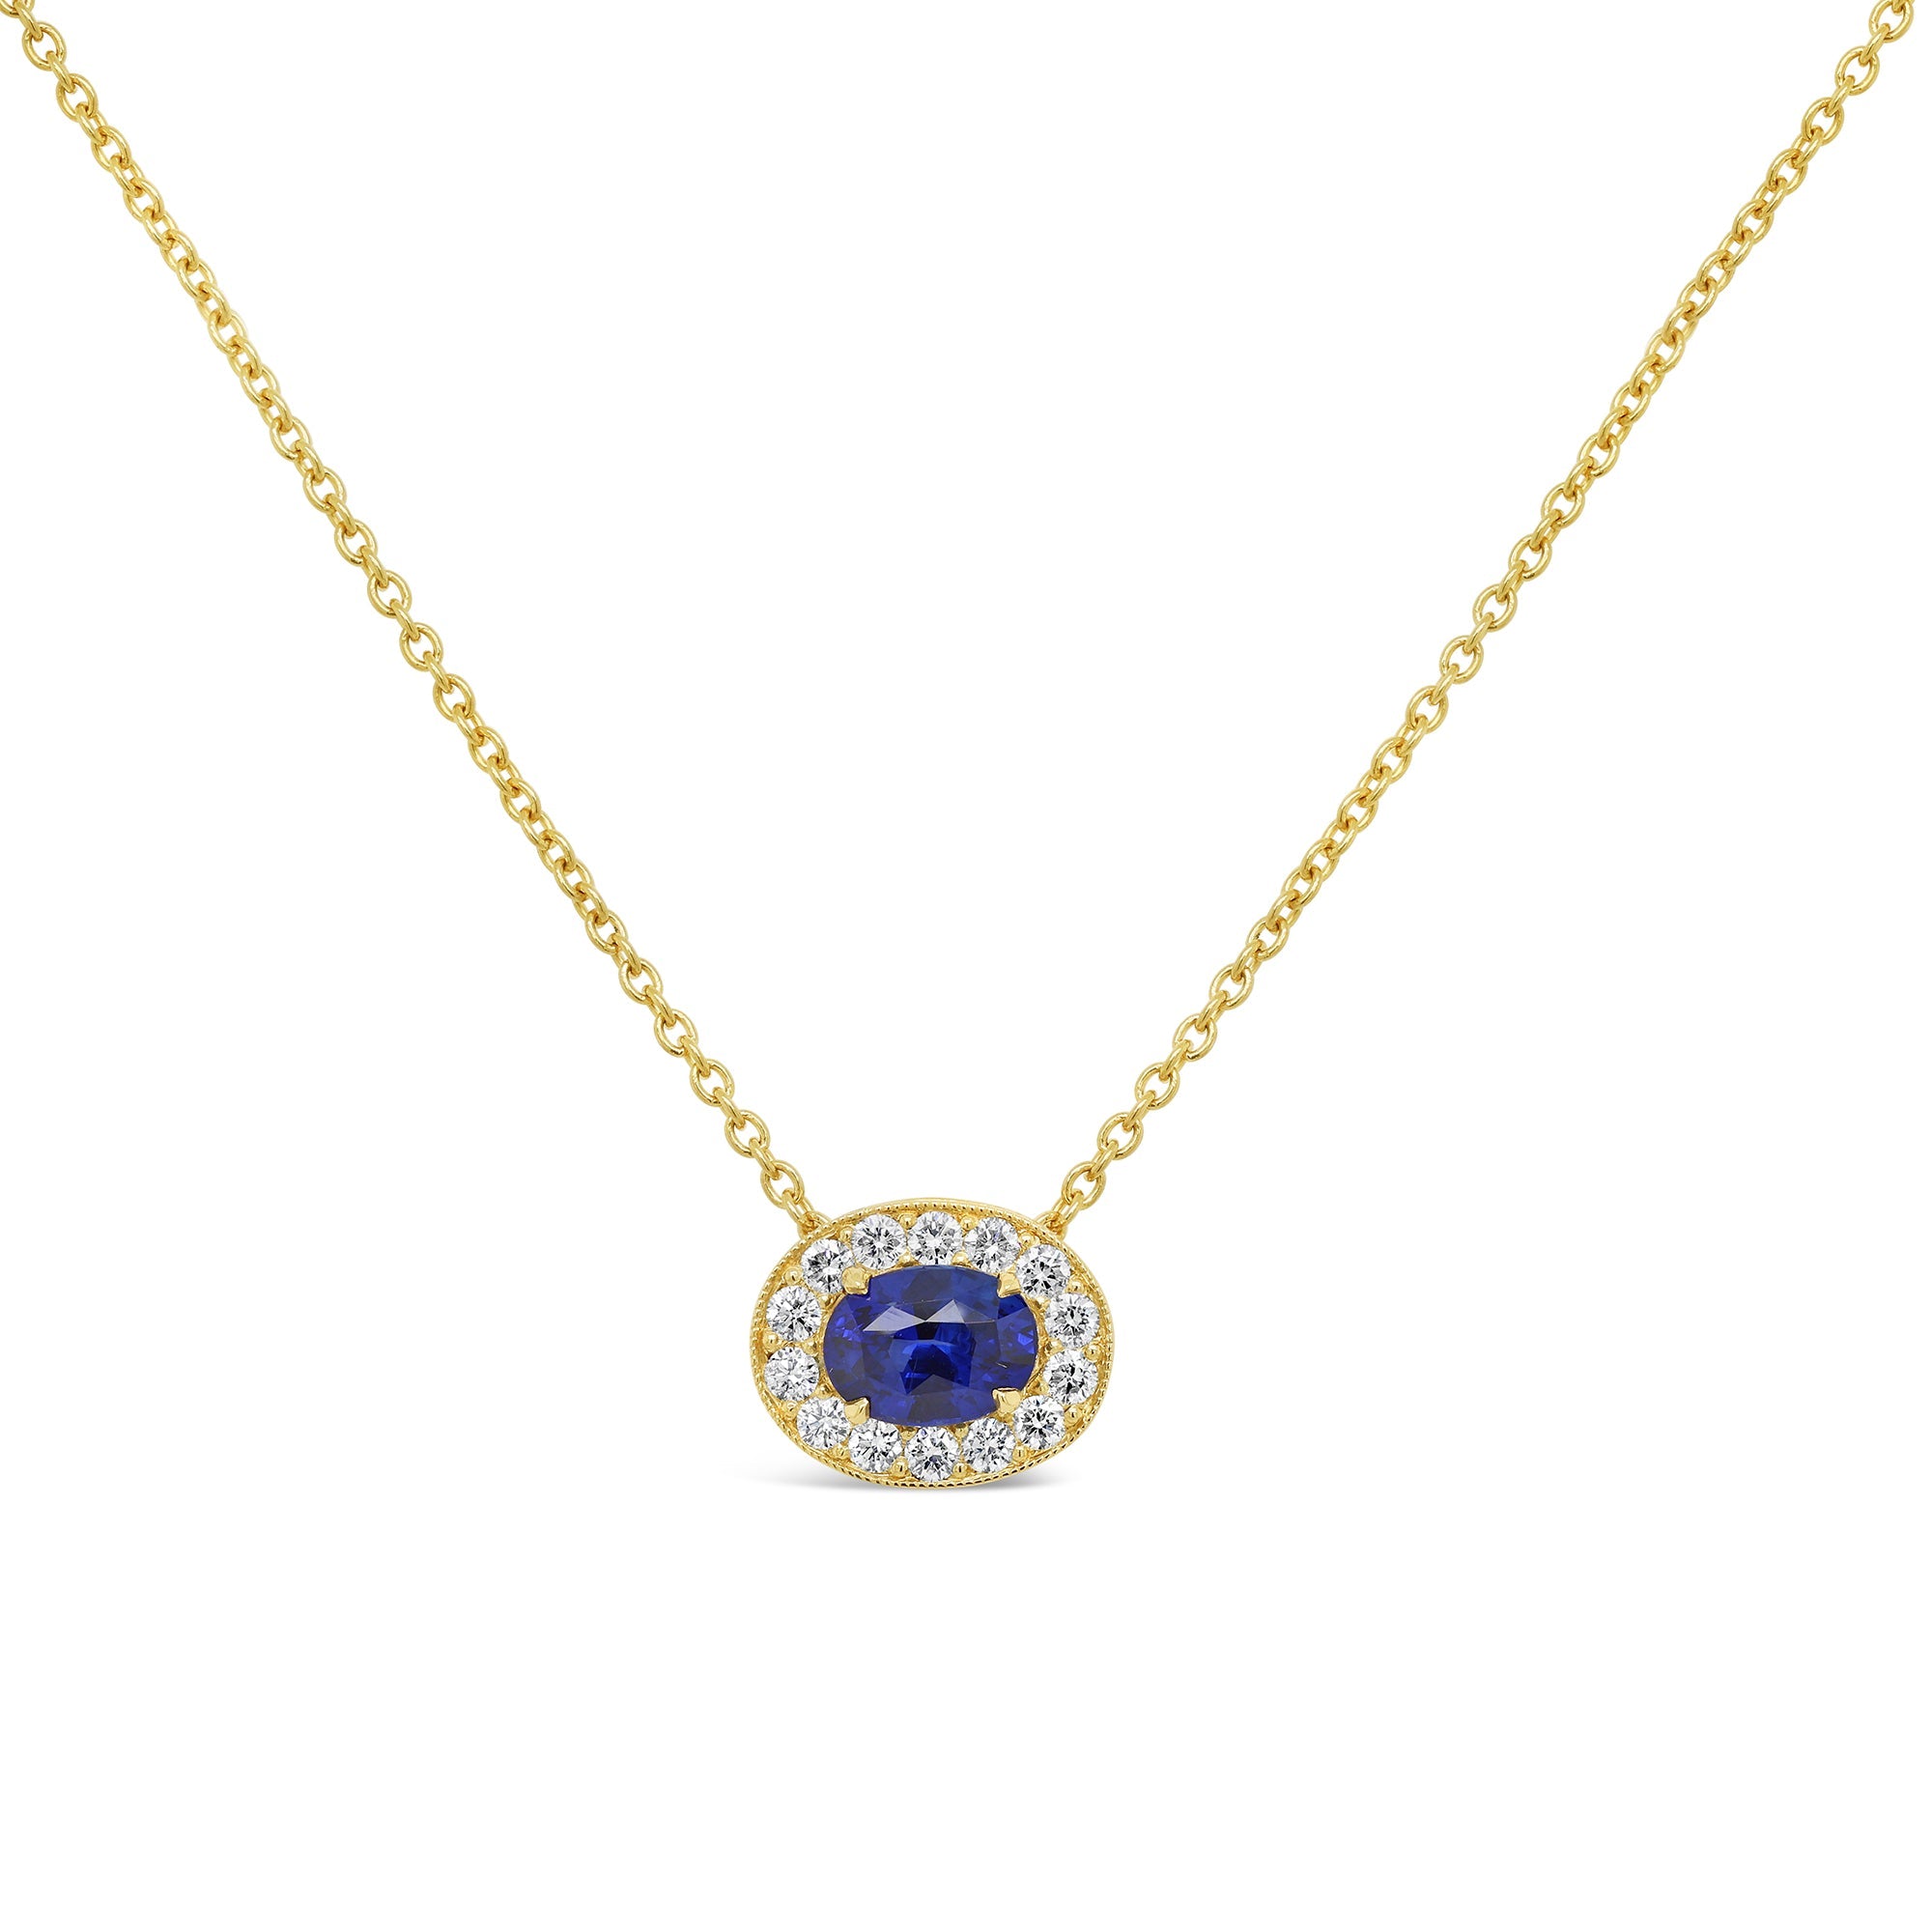 Blue sapphire, diamond and yellow gold pendant and necklace